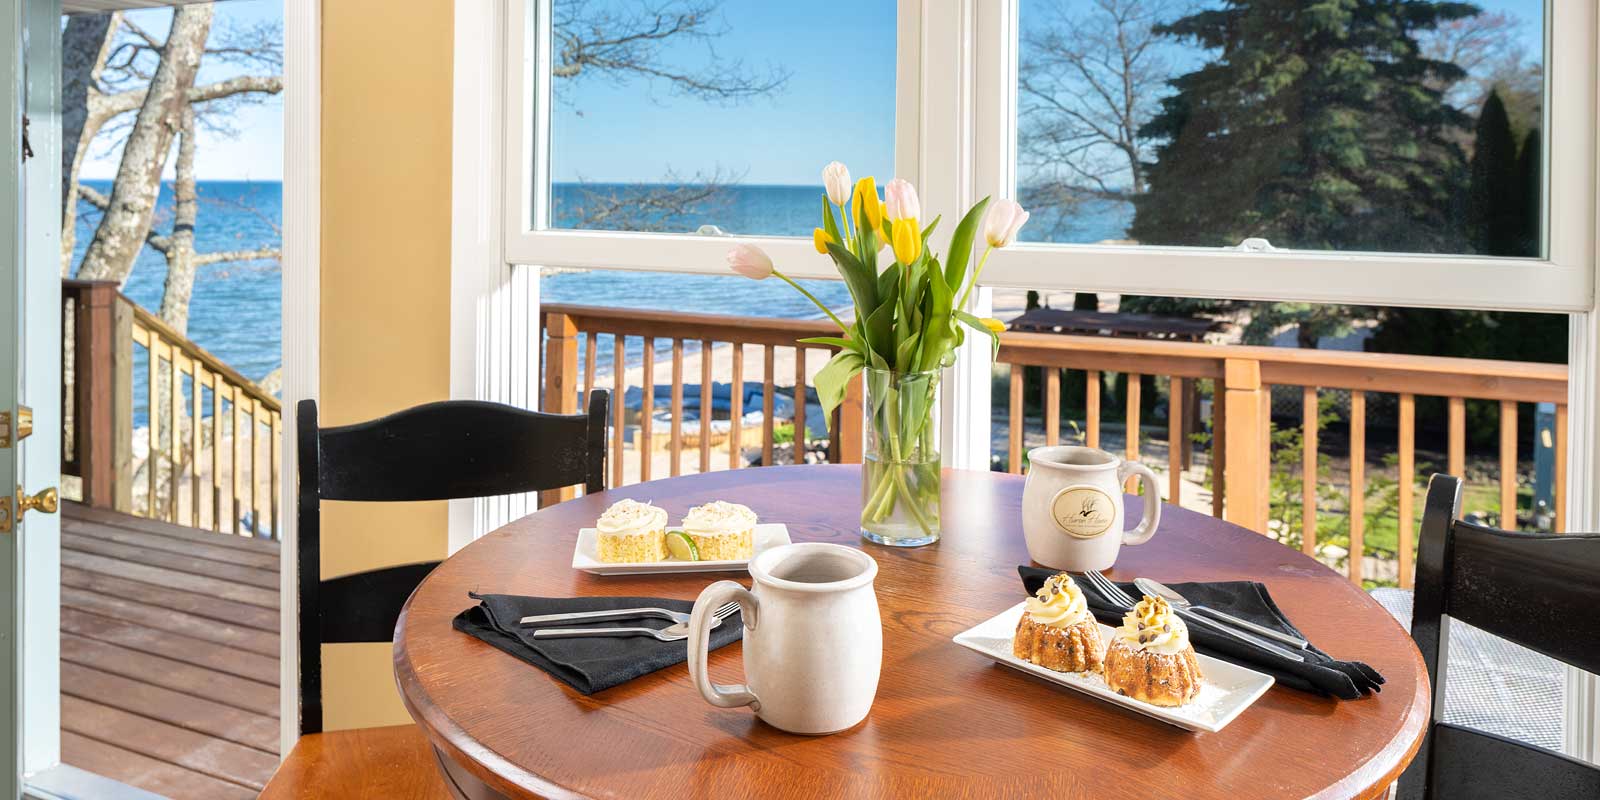 Eat on Your Private Deck...or Have Breakfast in Bed